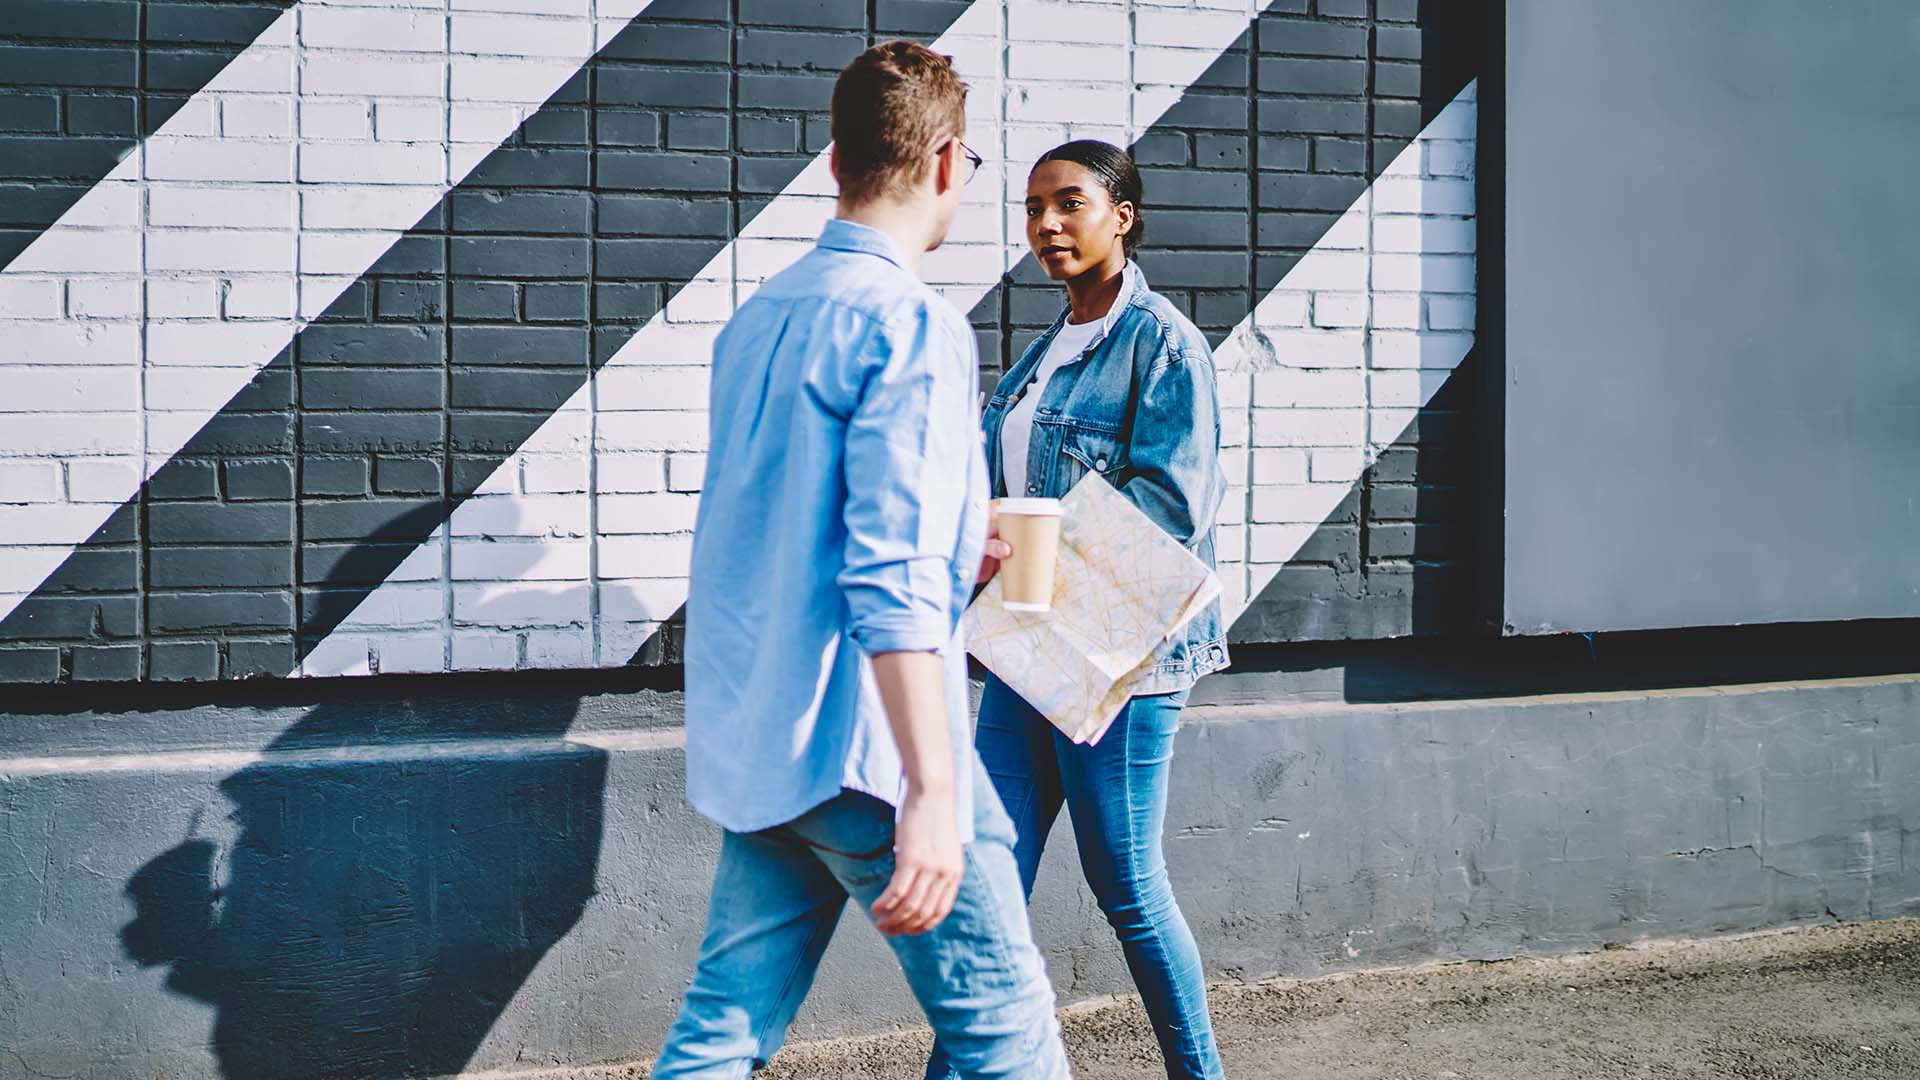 Man and woman dressed in light blue jeans making eye contact as they pass each other on the road while walking.